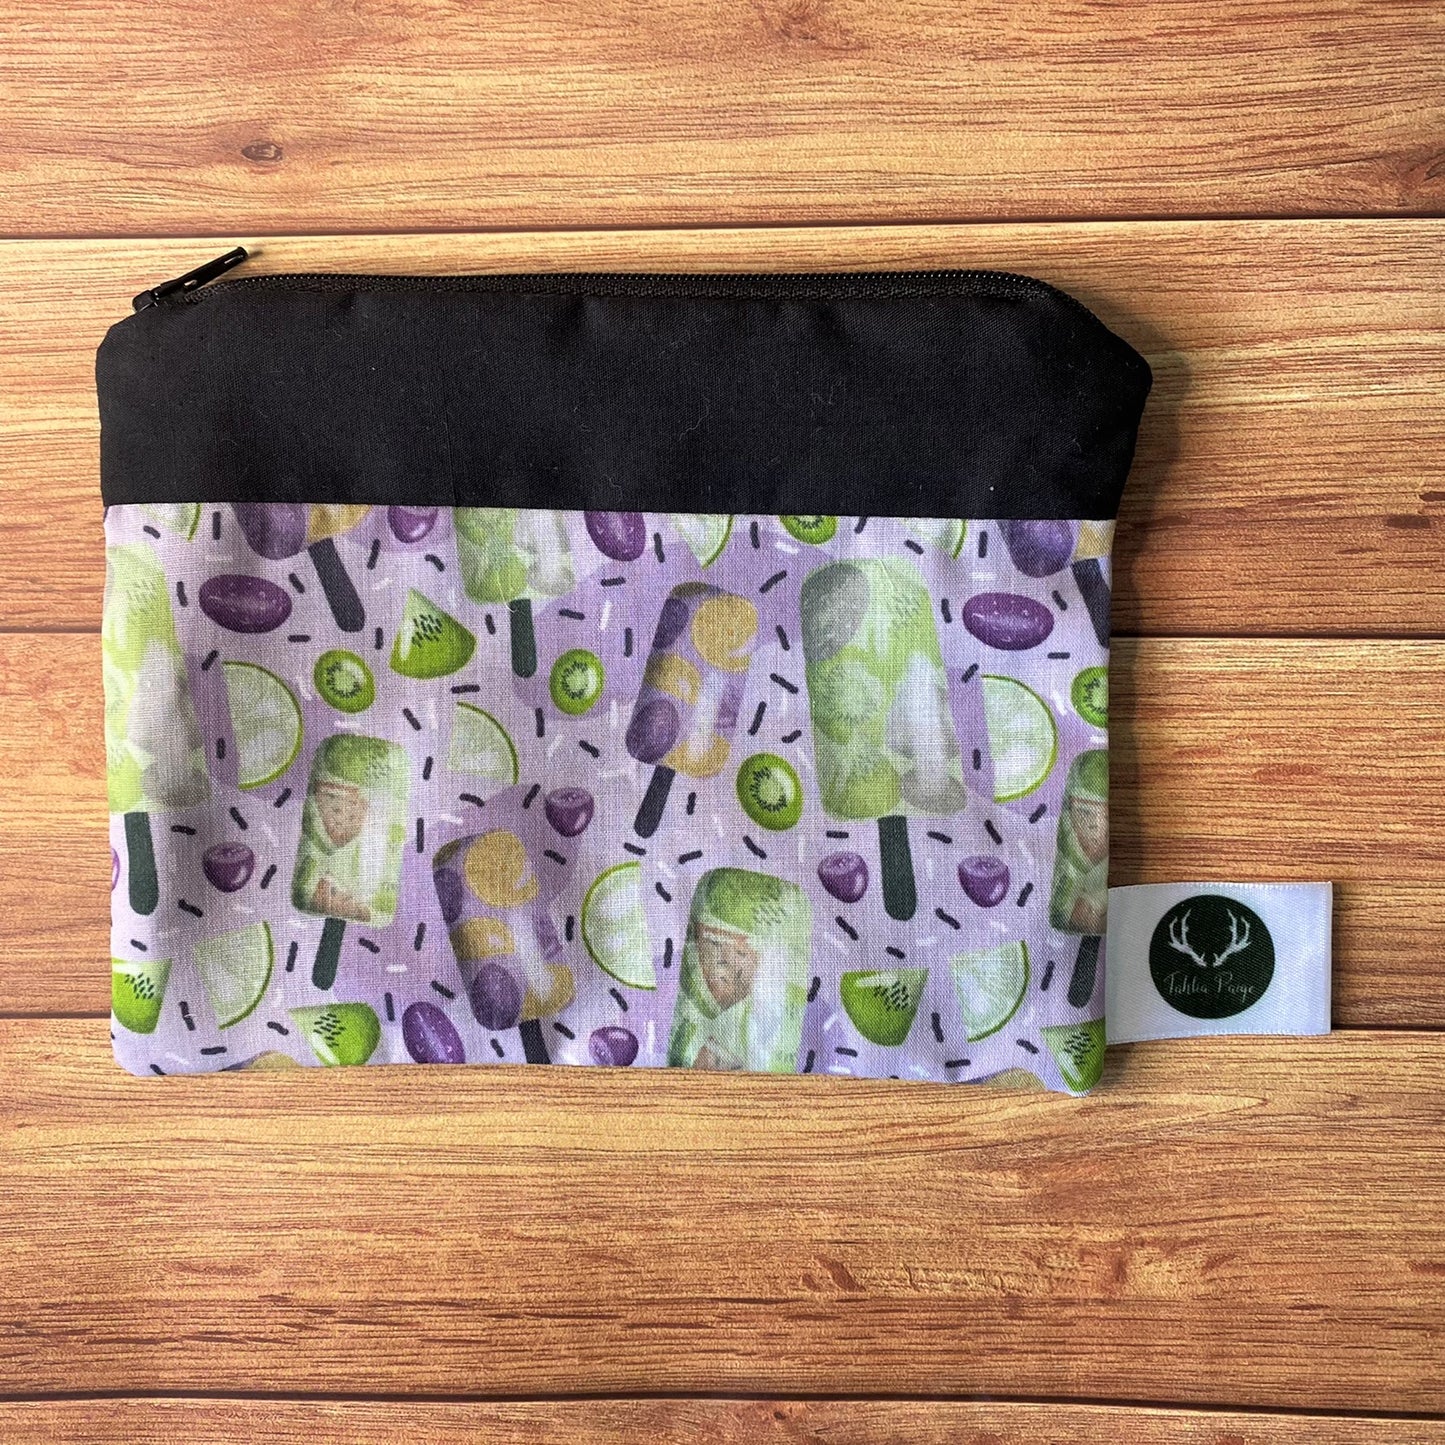 ideal gift for a teacher, our small purple patterned pouch is a great handmade gift for her as something small.